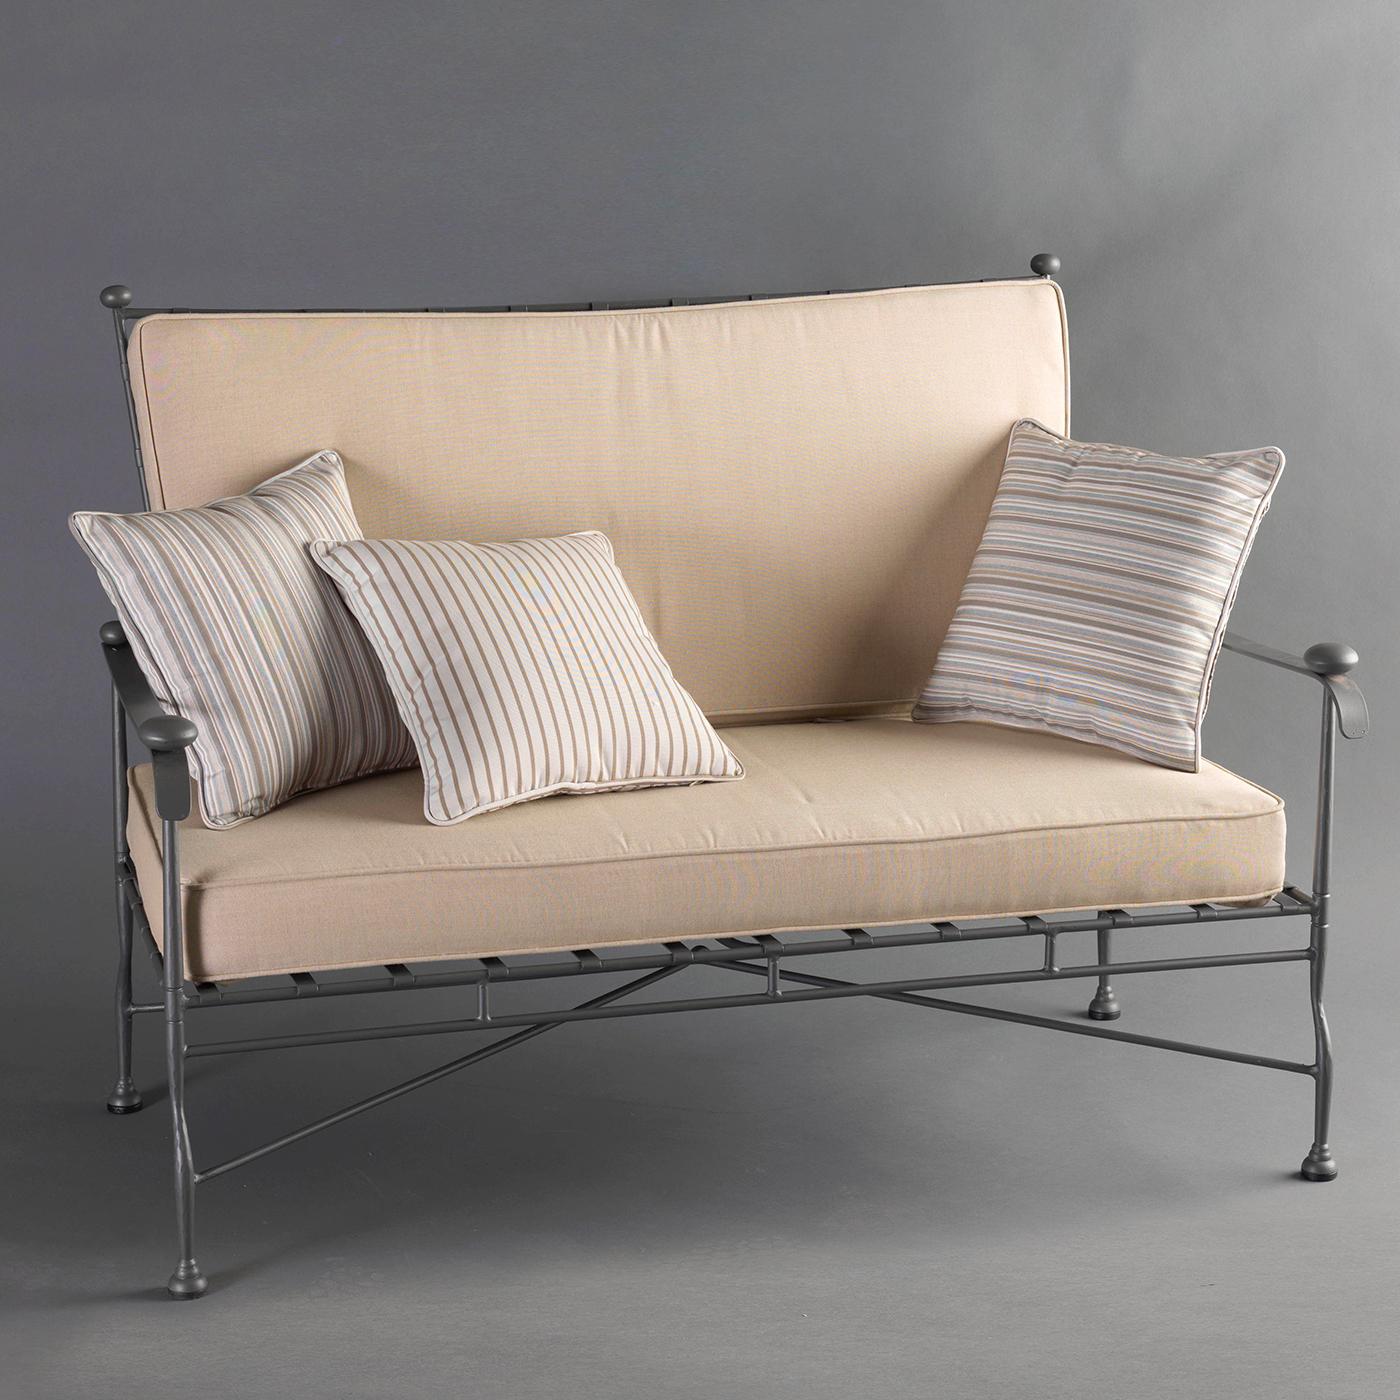 A superb addition to a patio, pool area, or terrace, this two-seat sofa is the result of masterful metalworking skills. Entirely made of stainless steel, this lovely piece evokes the relaxing charm and timeless elegance of the Tuscan countryside.